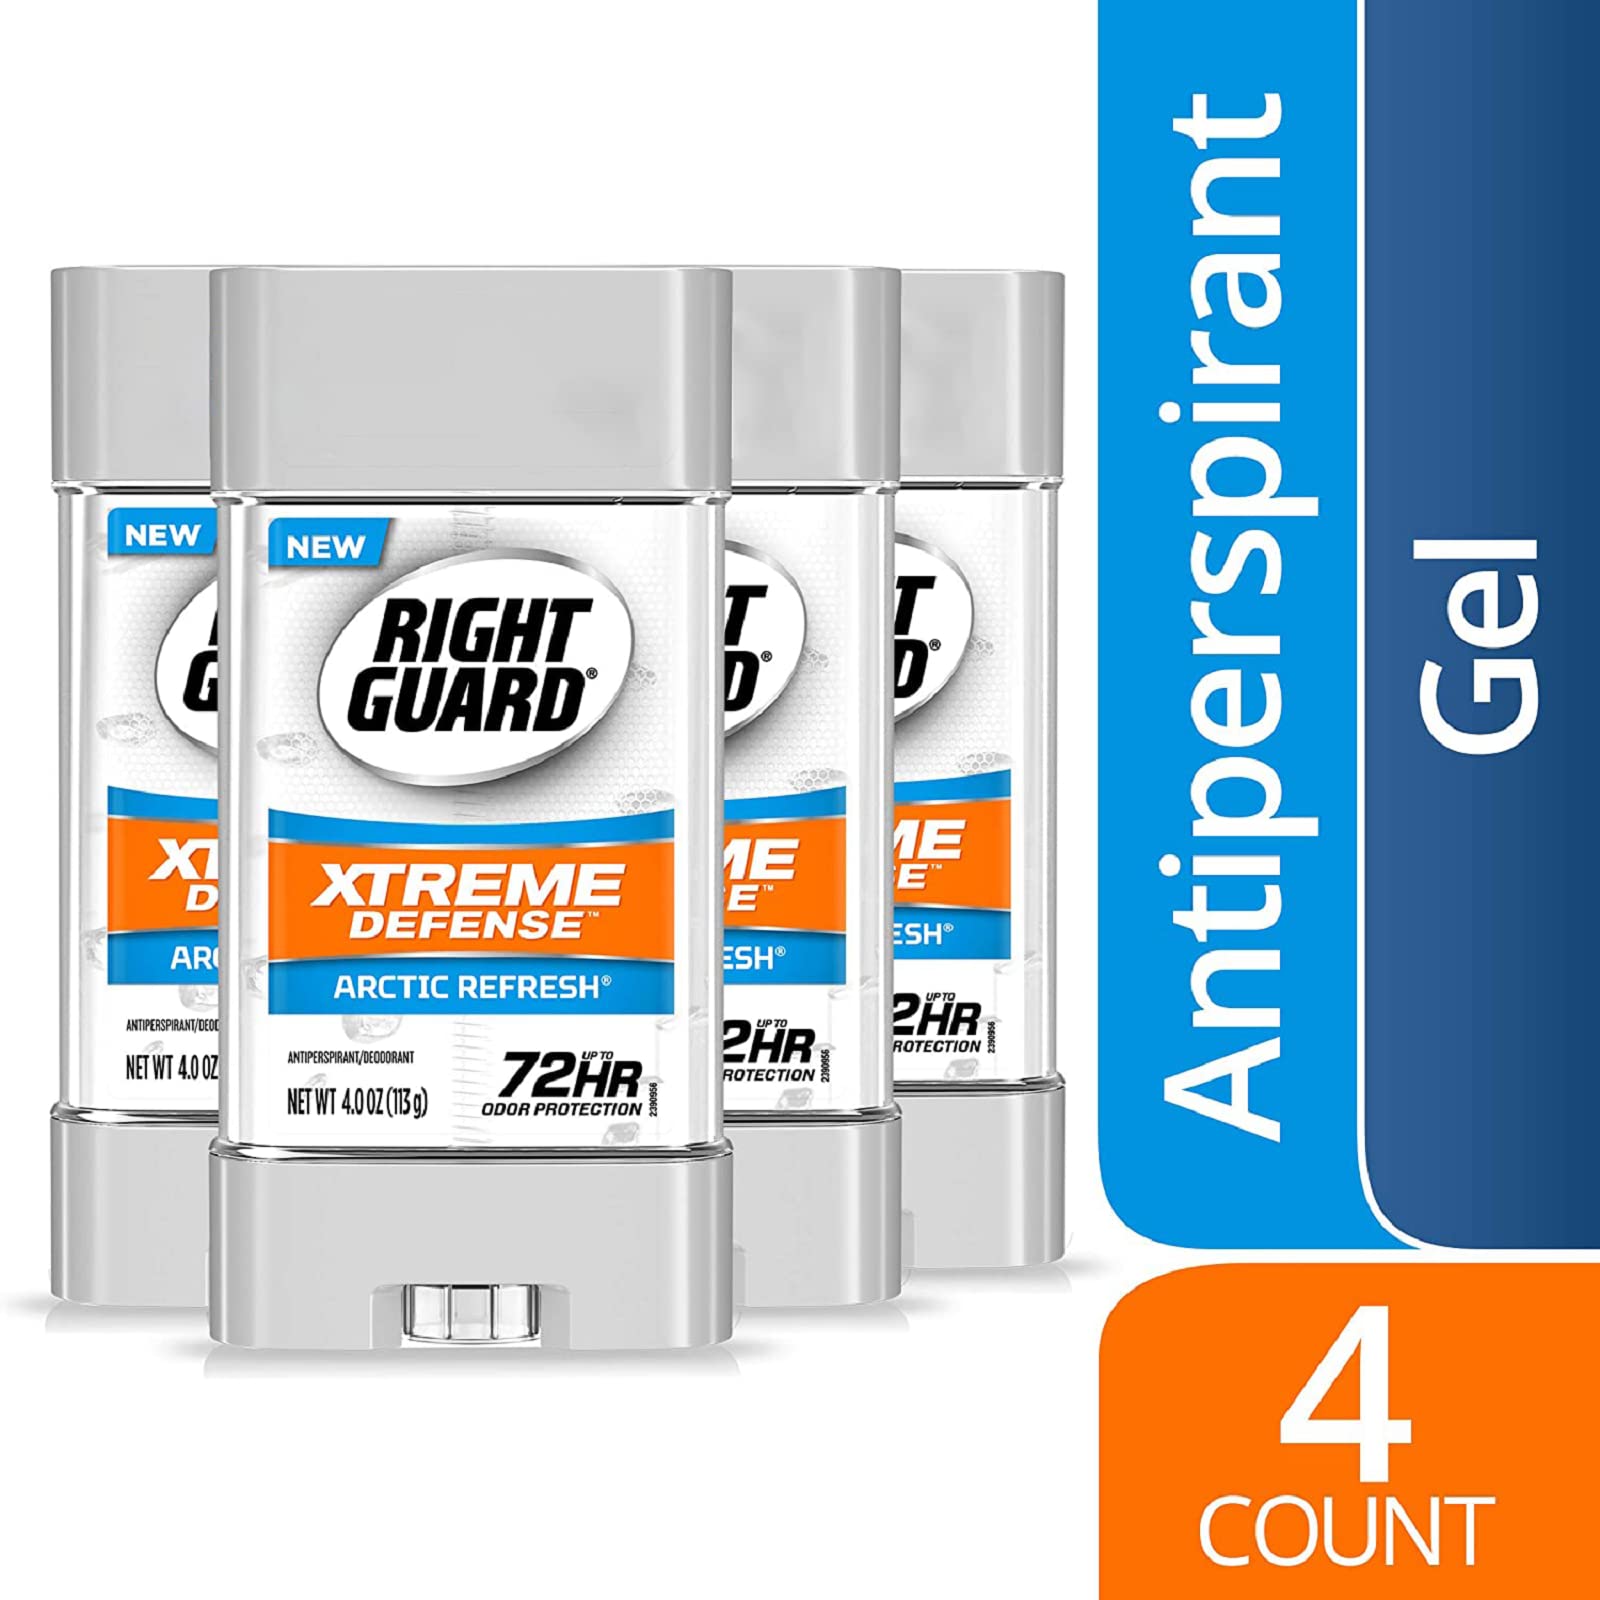 Right Guard Xtreme Defense Antiperspirant Deodorant Gel, Arctic Refresh, 4 Ounce (Pack of 4)